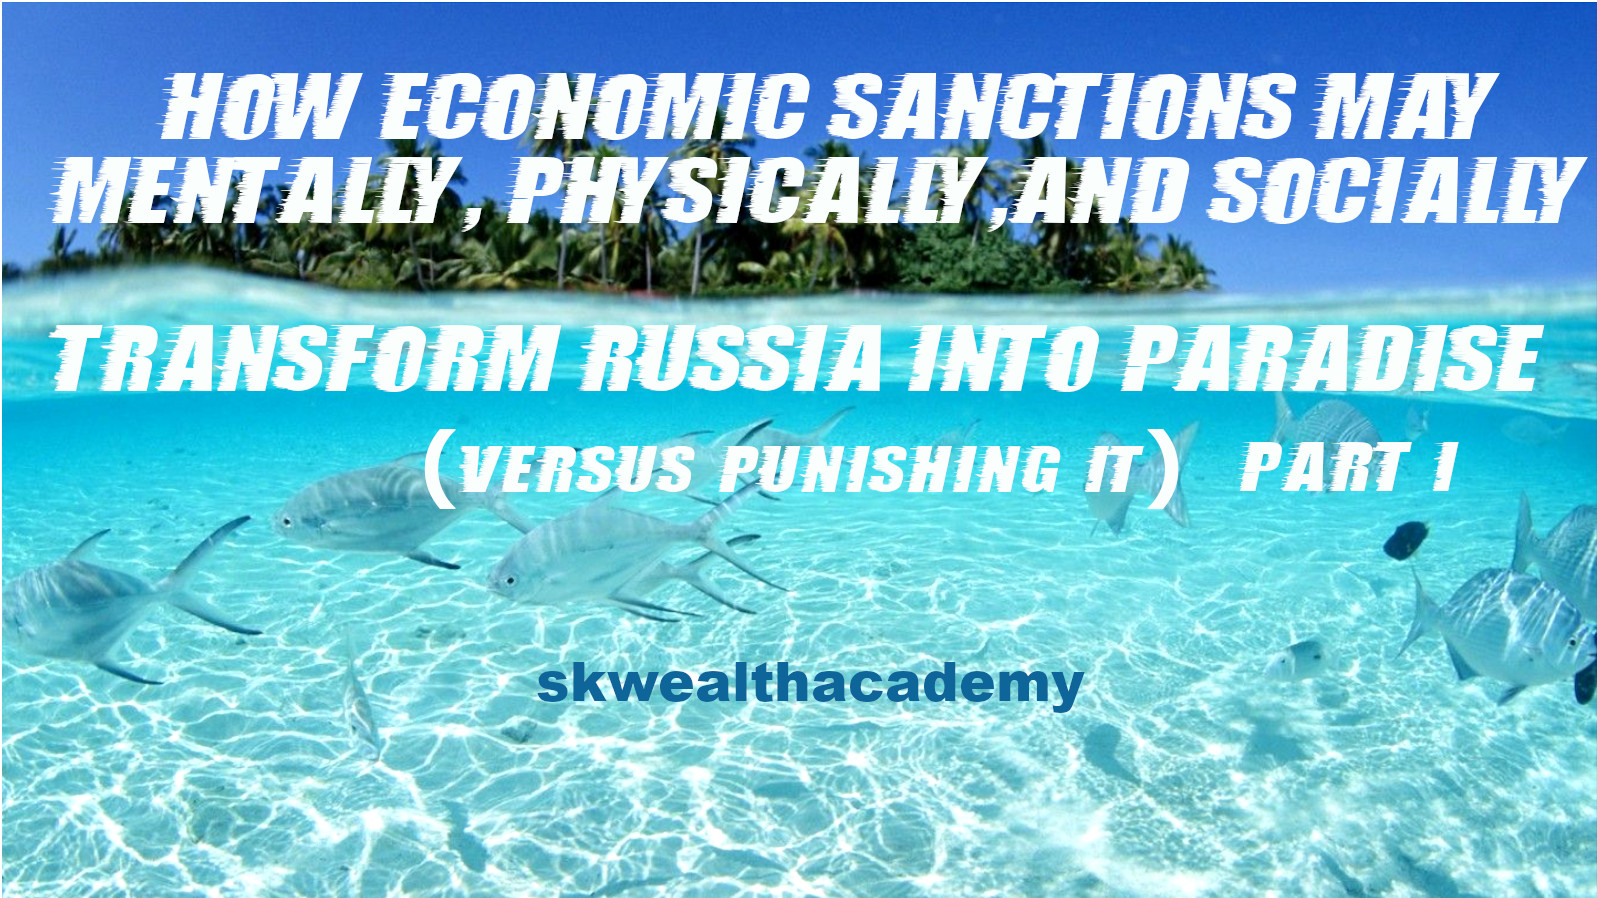 Russian economic sanctions, part I: major global companies that have withdrawn or are shutting down business in Russia